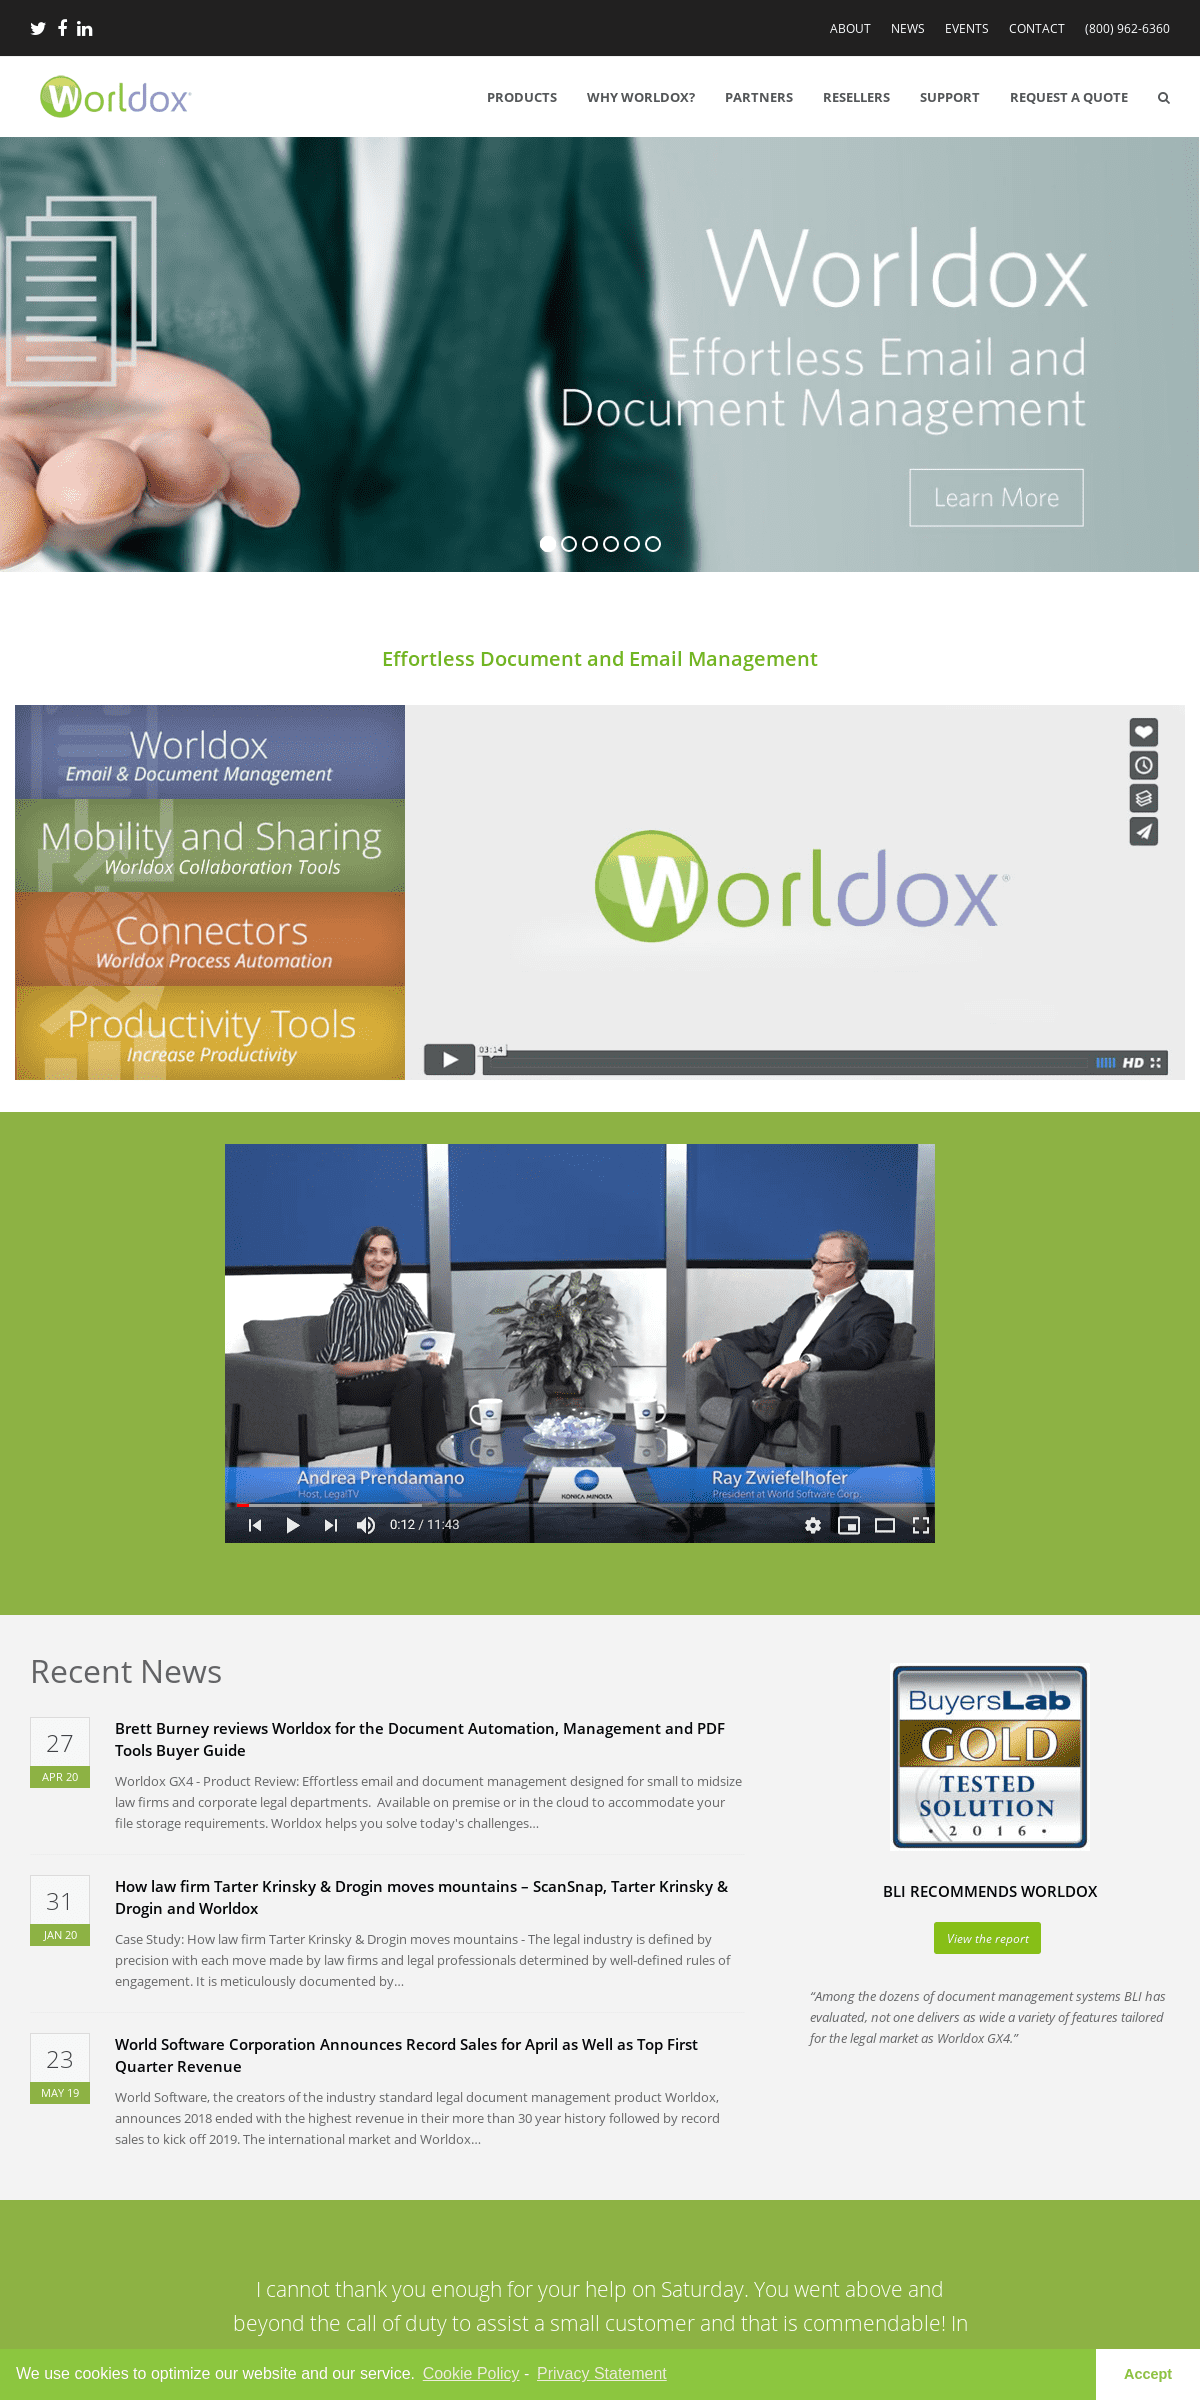 A complete backup of worldox.com